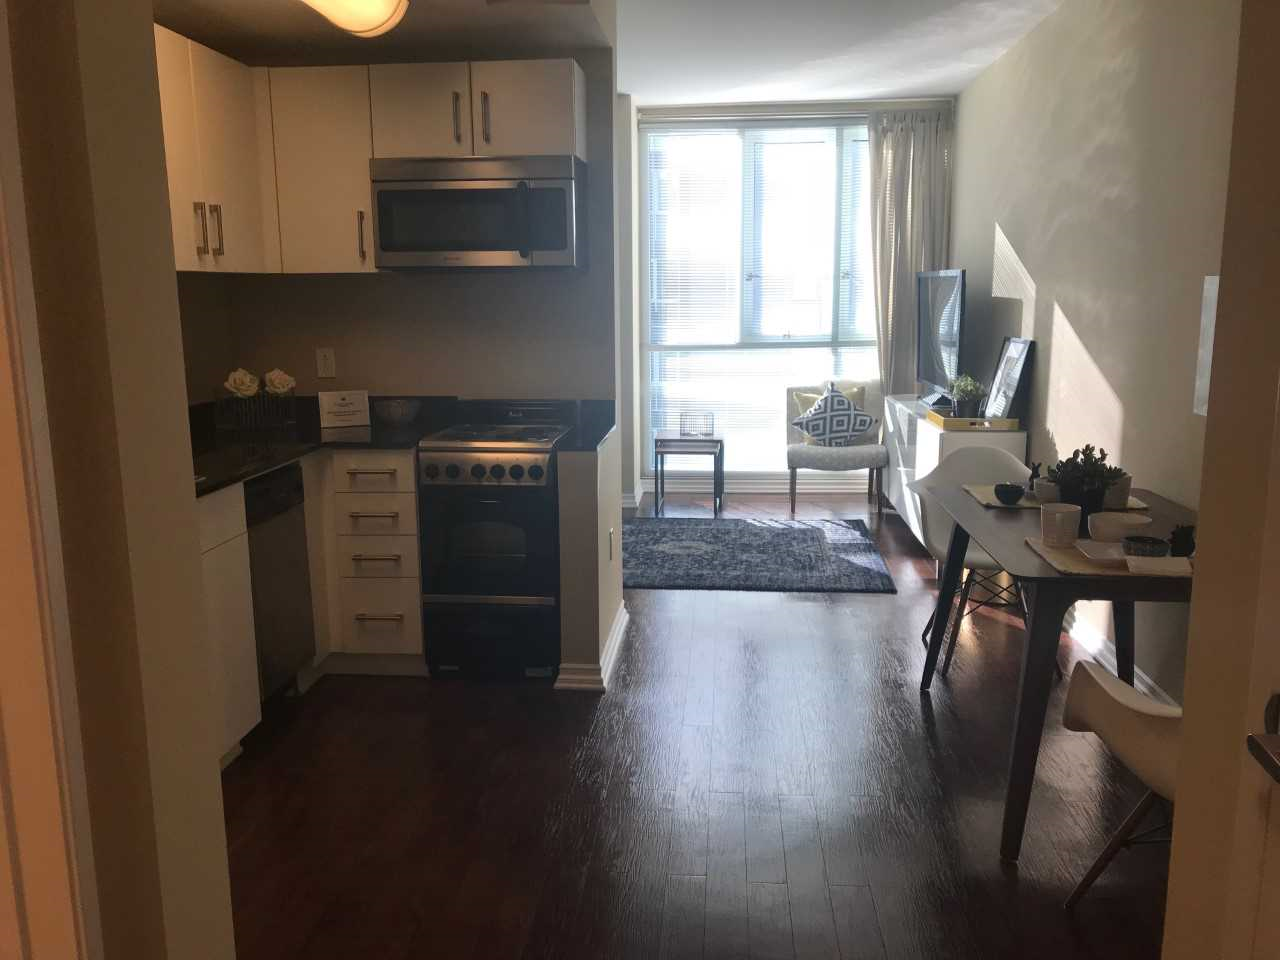 Inside view of a unit from the kitchen area. Kitchen has a small stove, a microwave overhead, and a dishwasher on the side. There is also wood flooring in the unit and has large windows.